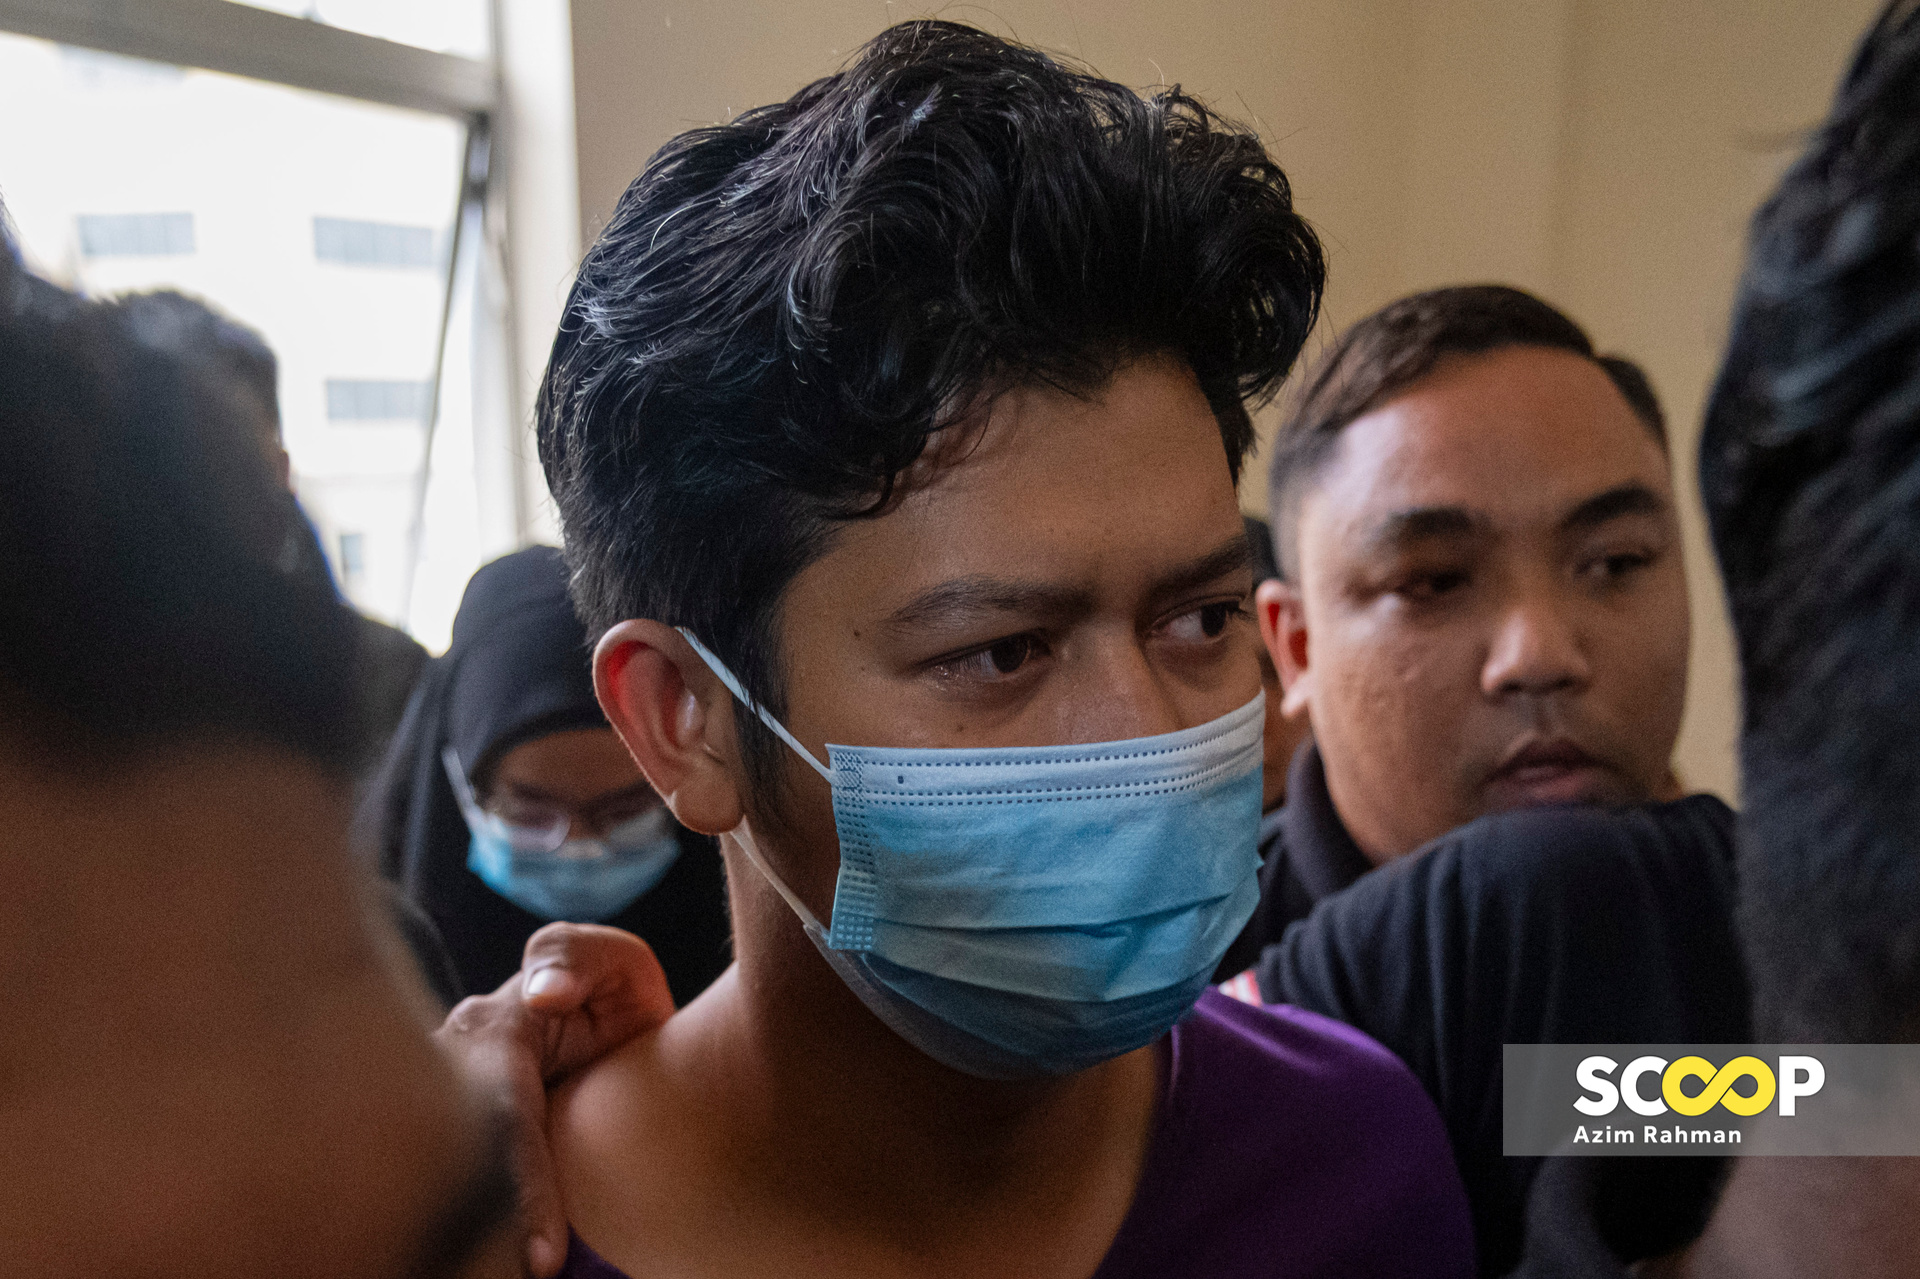 The killer is still out there: Zayn Rayyan's parents in tears, seeking justice